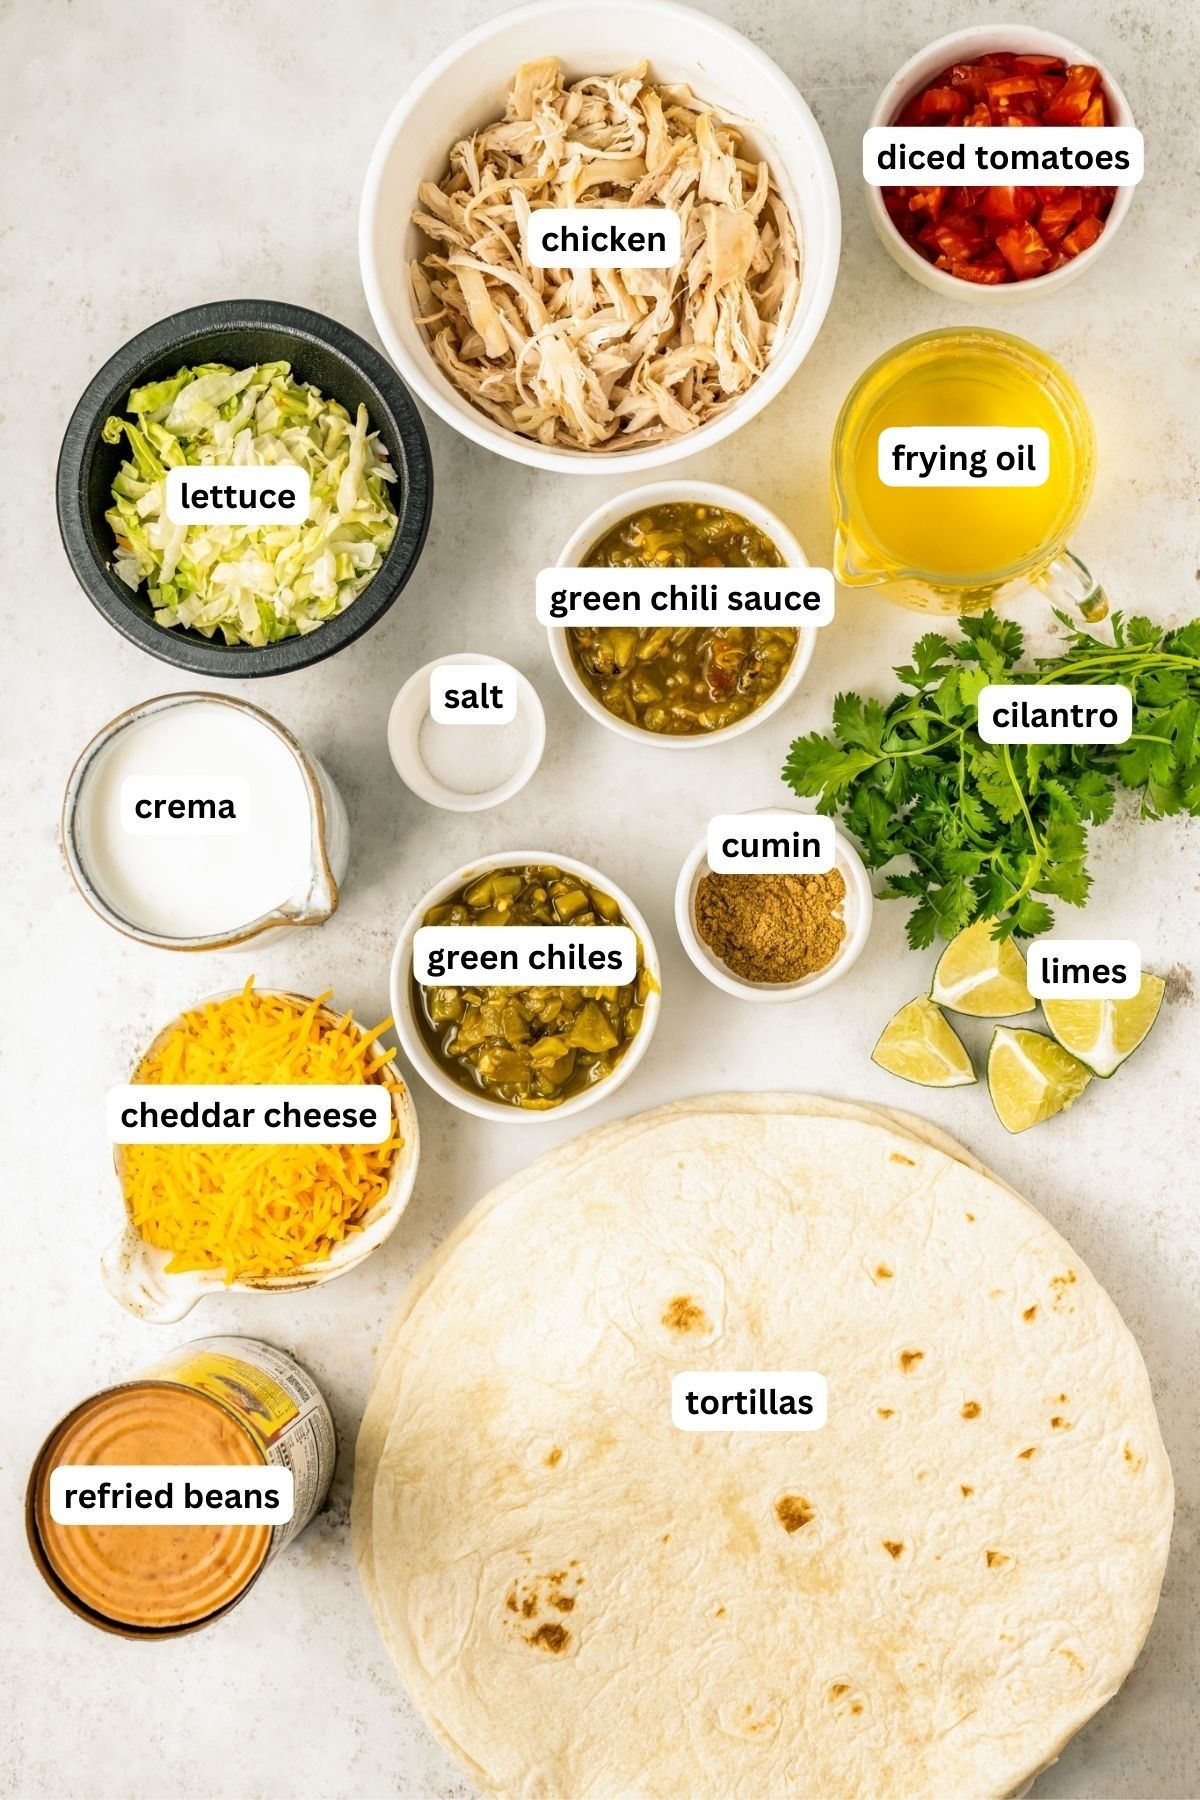 Ingredients for chicken chimichanga recipe, arranged in bowls. From top to bottom: diced tomatoes, shredded chicken, lettuce, frying oil, green chili sauce, salt, Mexican Crema, cilantro, cumin, green chilies, cheddar cheese, limes, refried beans and large tortillas.